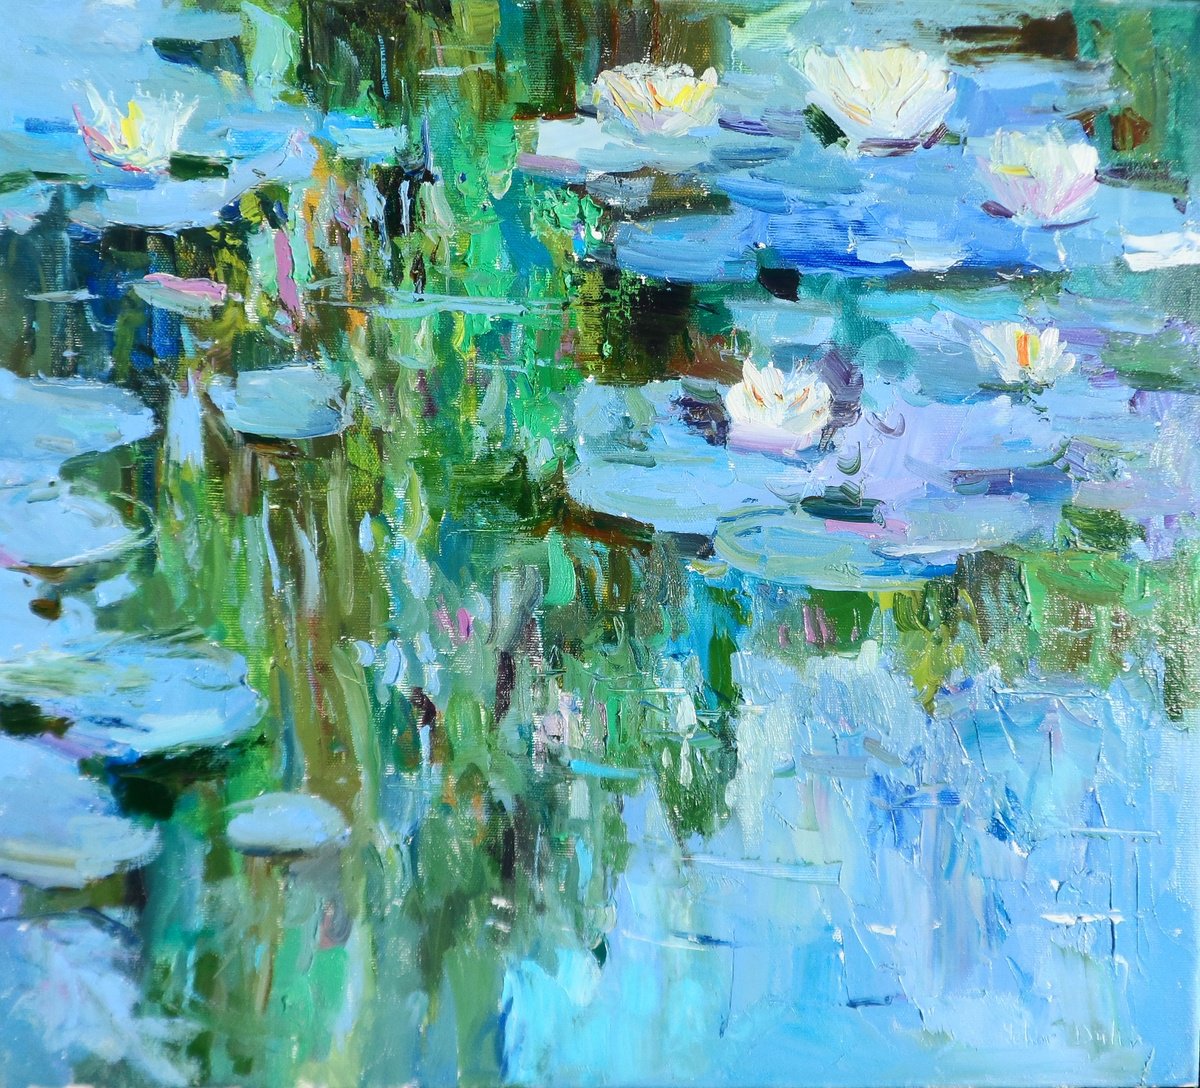 Water lilies by Yehor Dulin